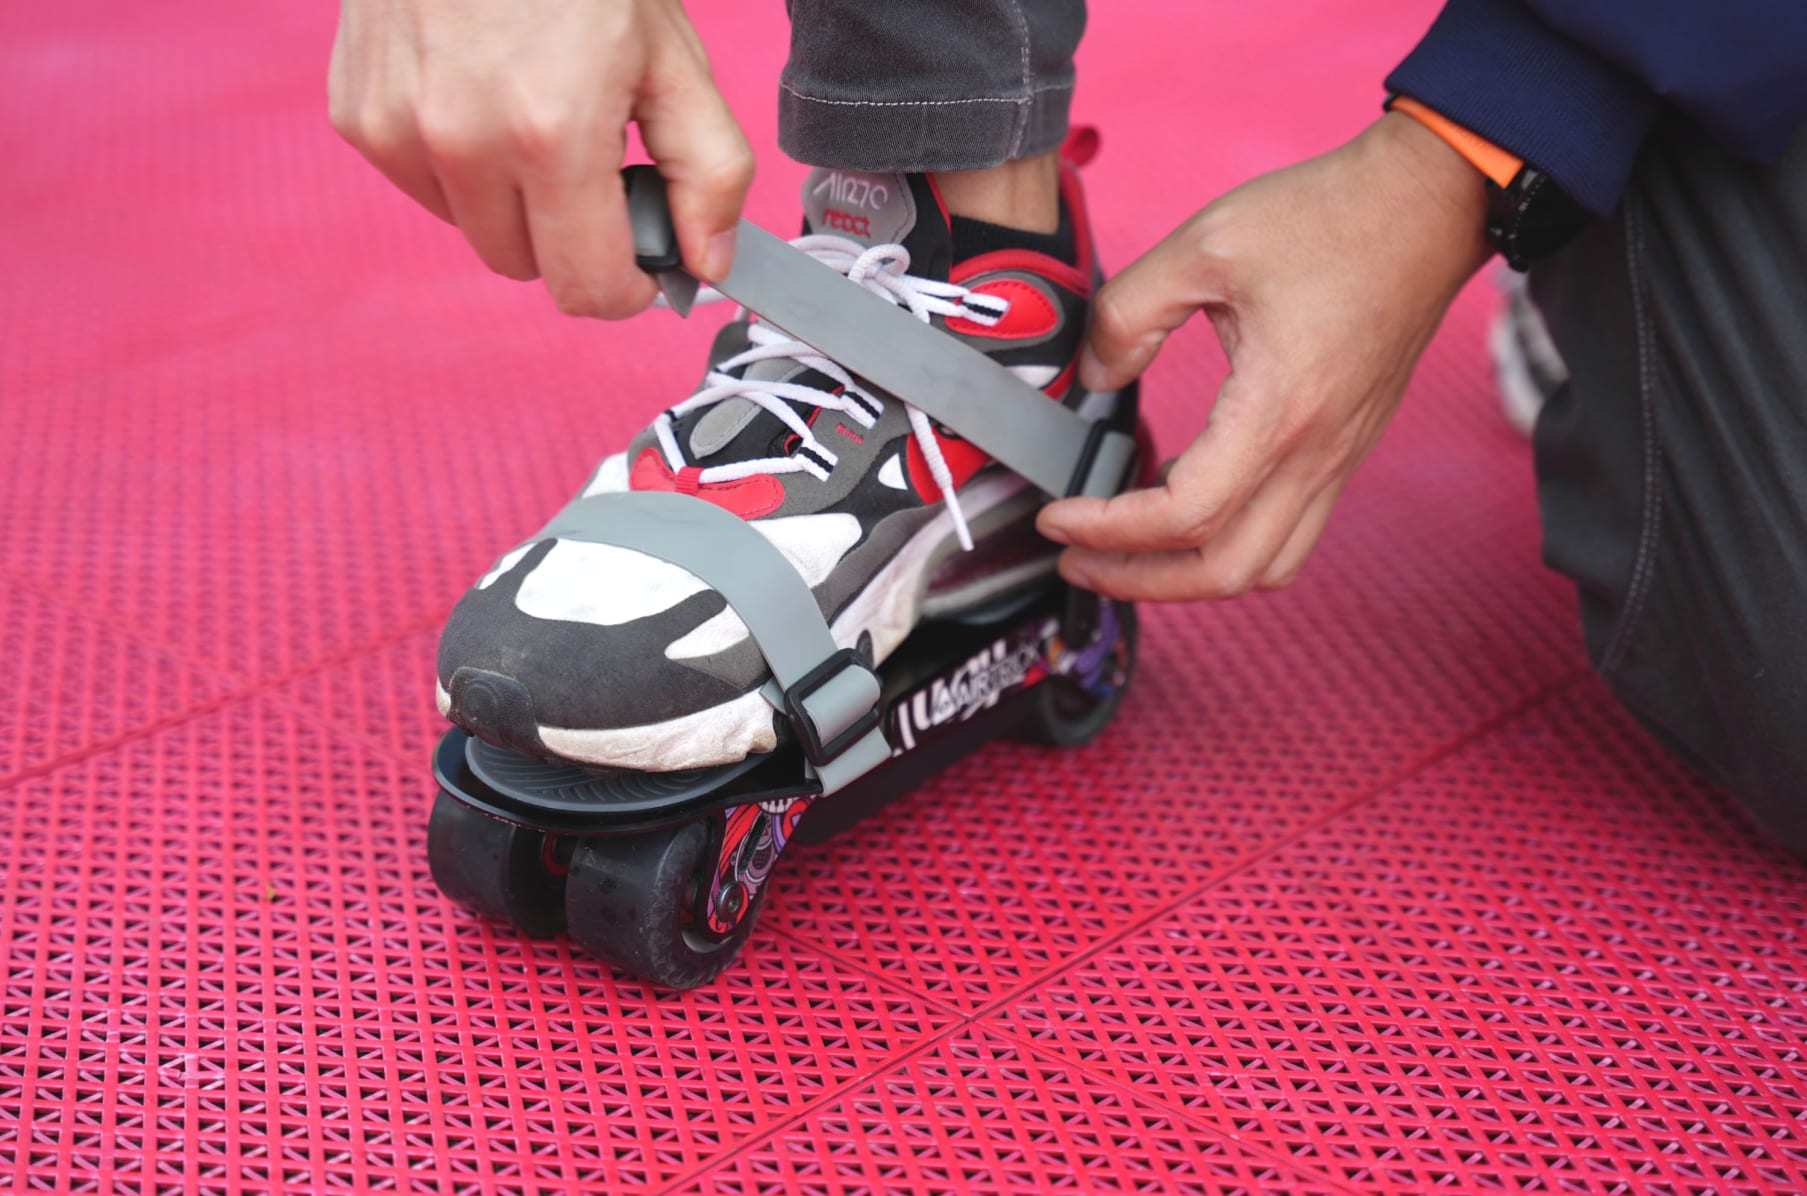 Airtrick E-Skates:World's Smallest and Lightest | Indiegogo